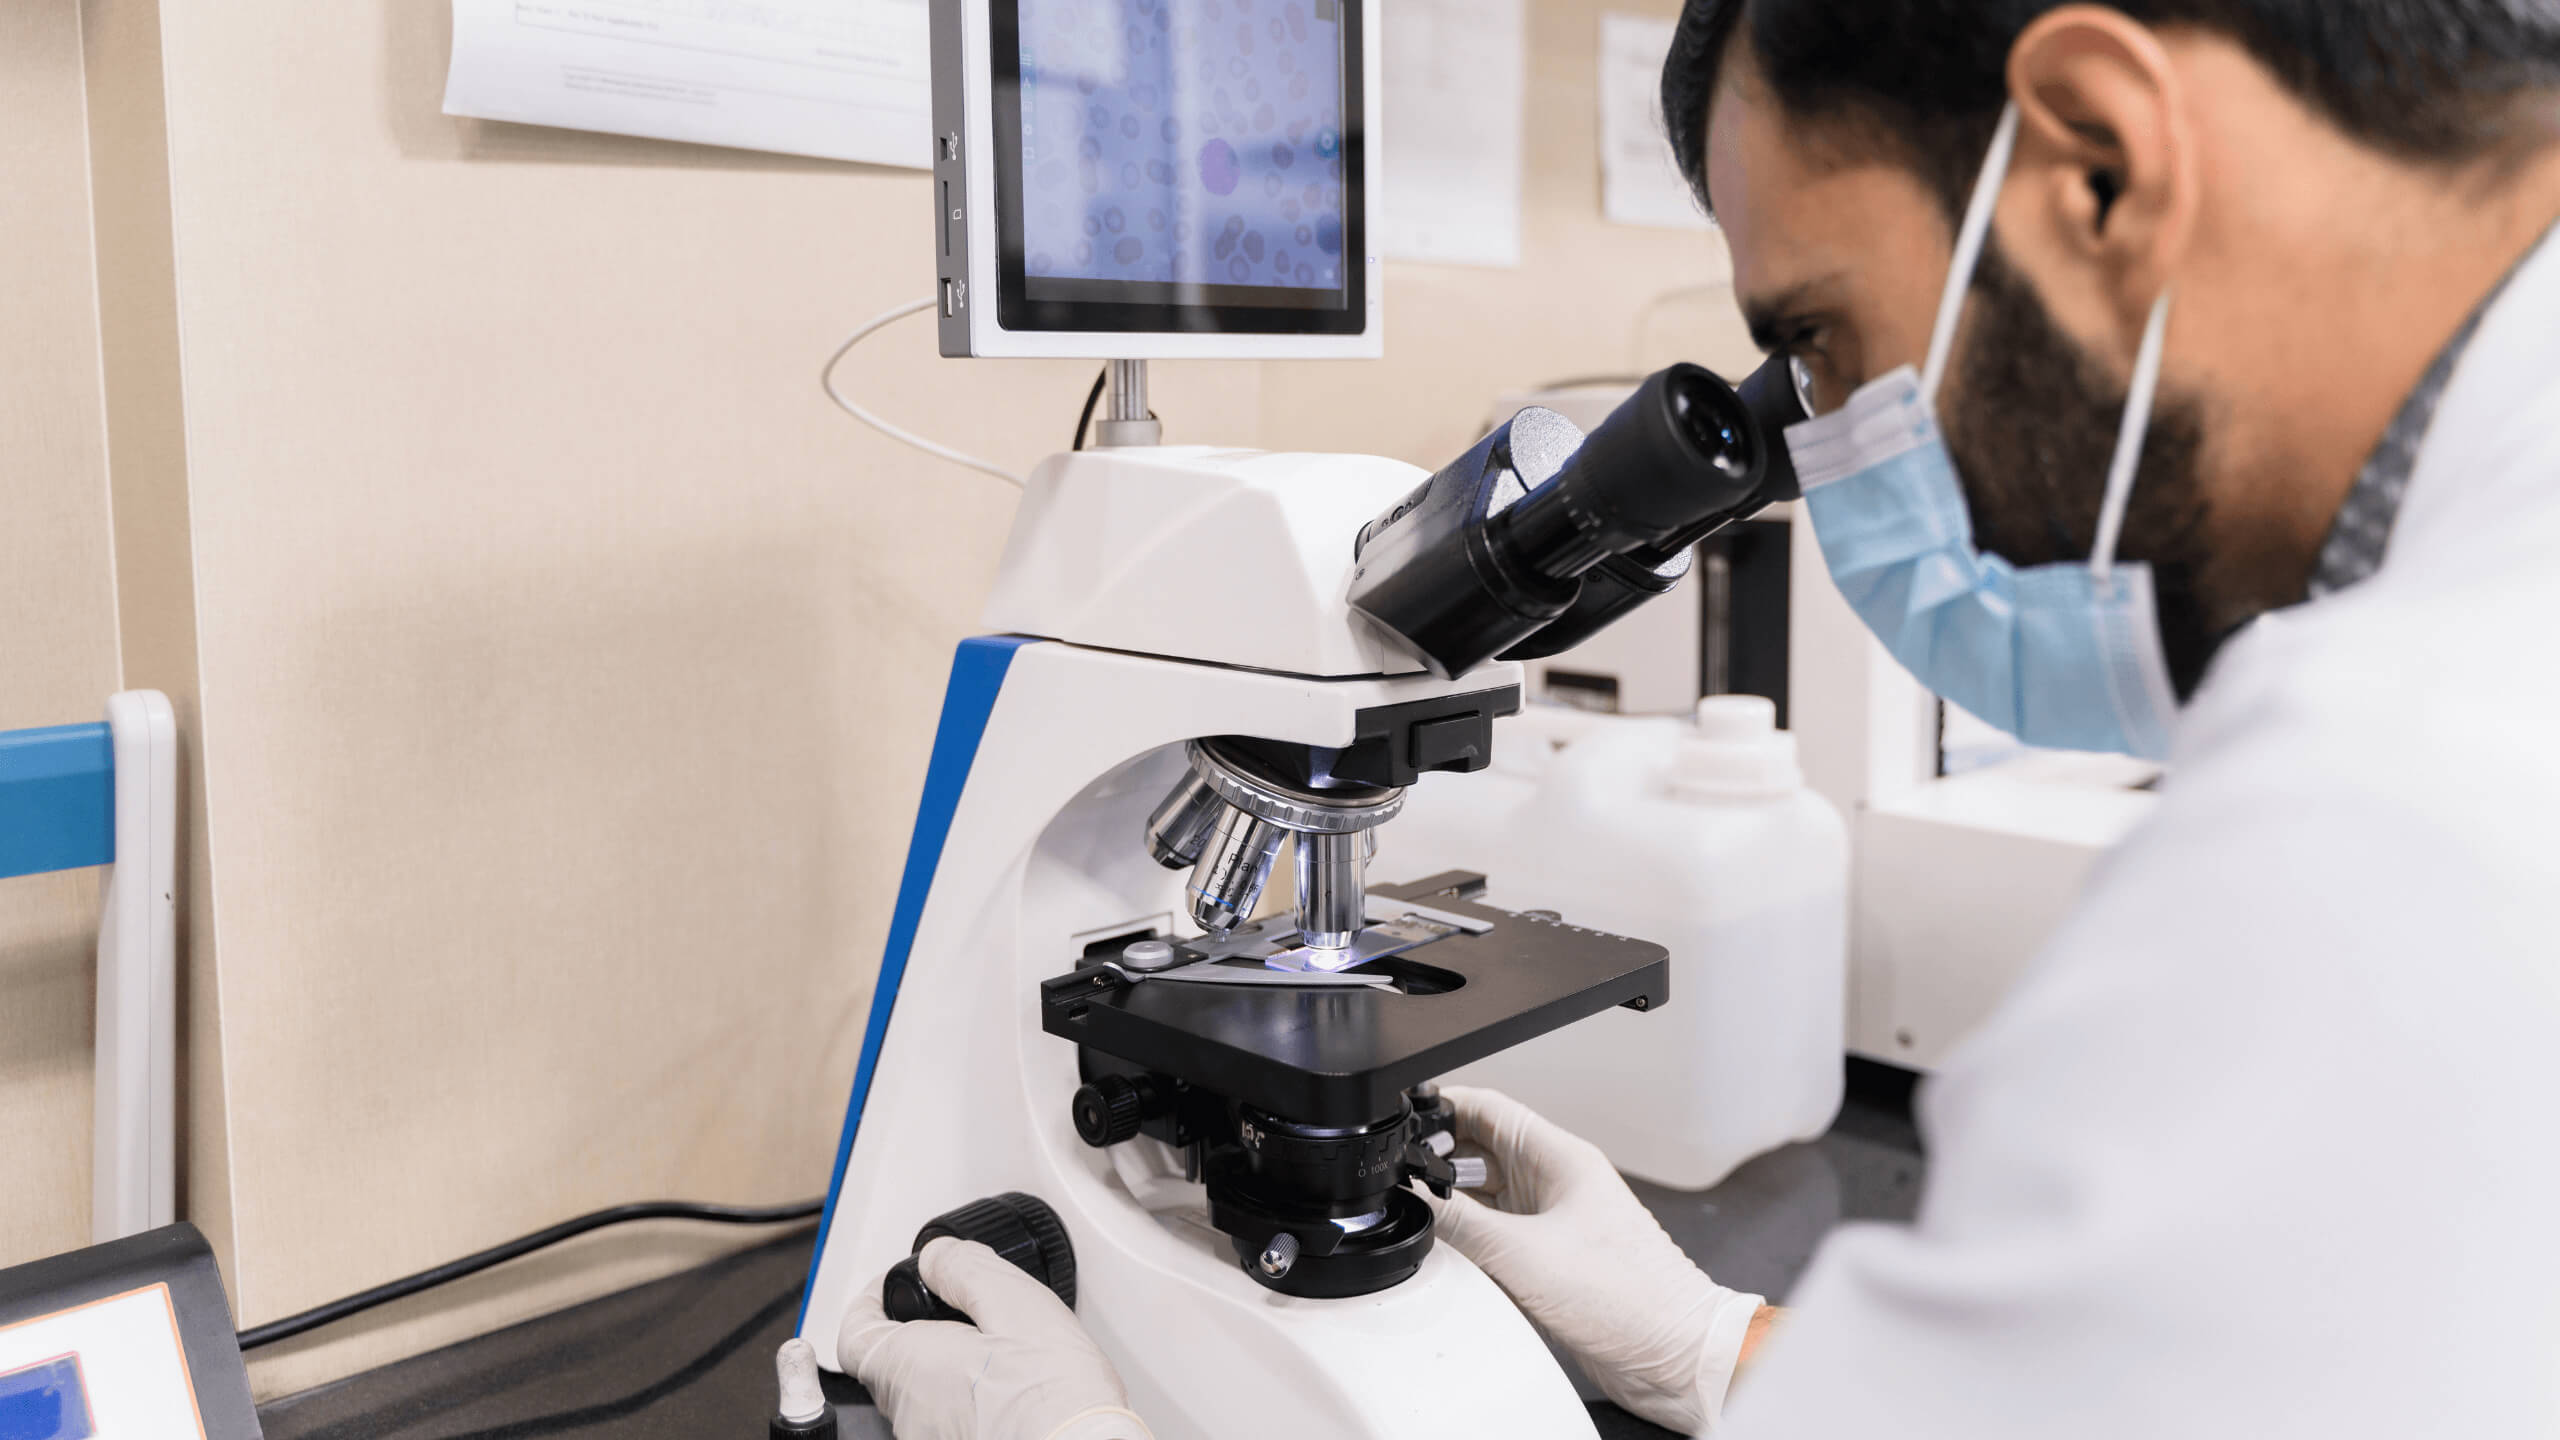 Middle-aged virologist looking through microscope in lab